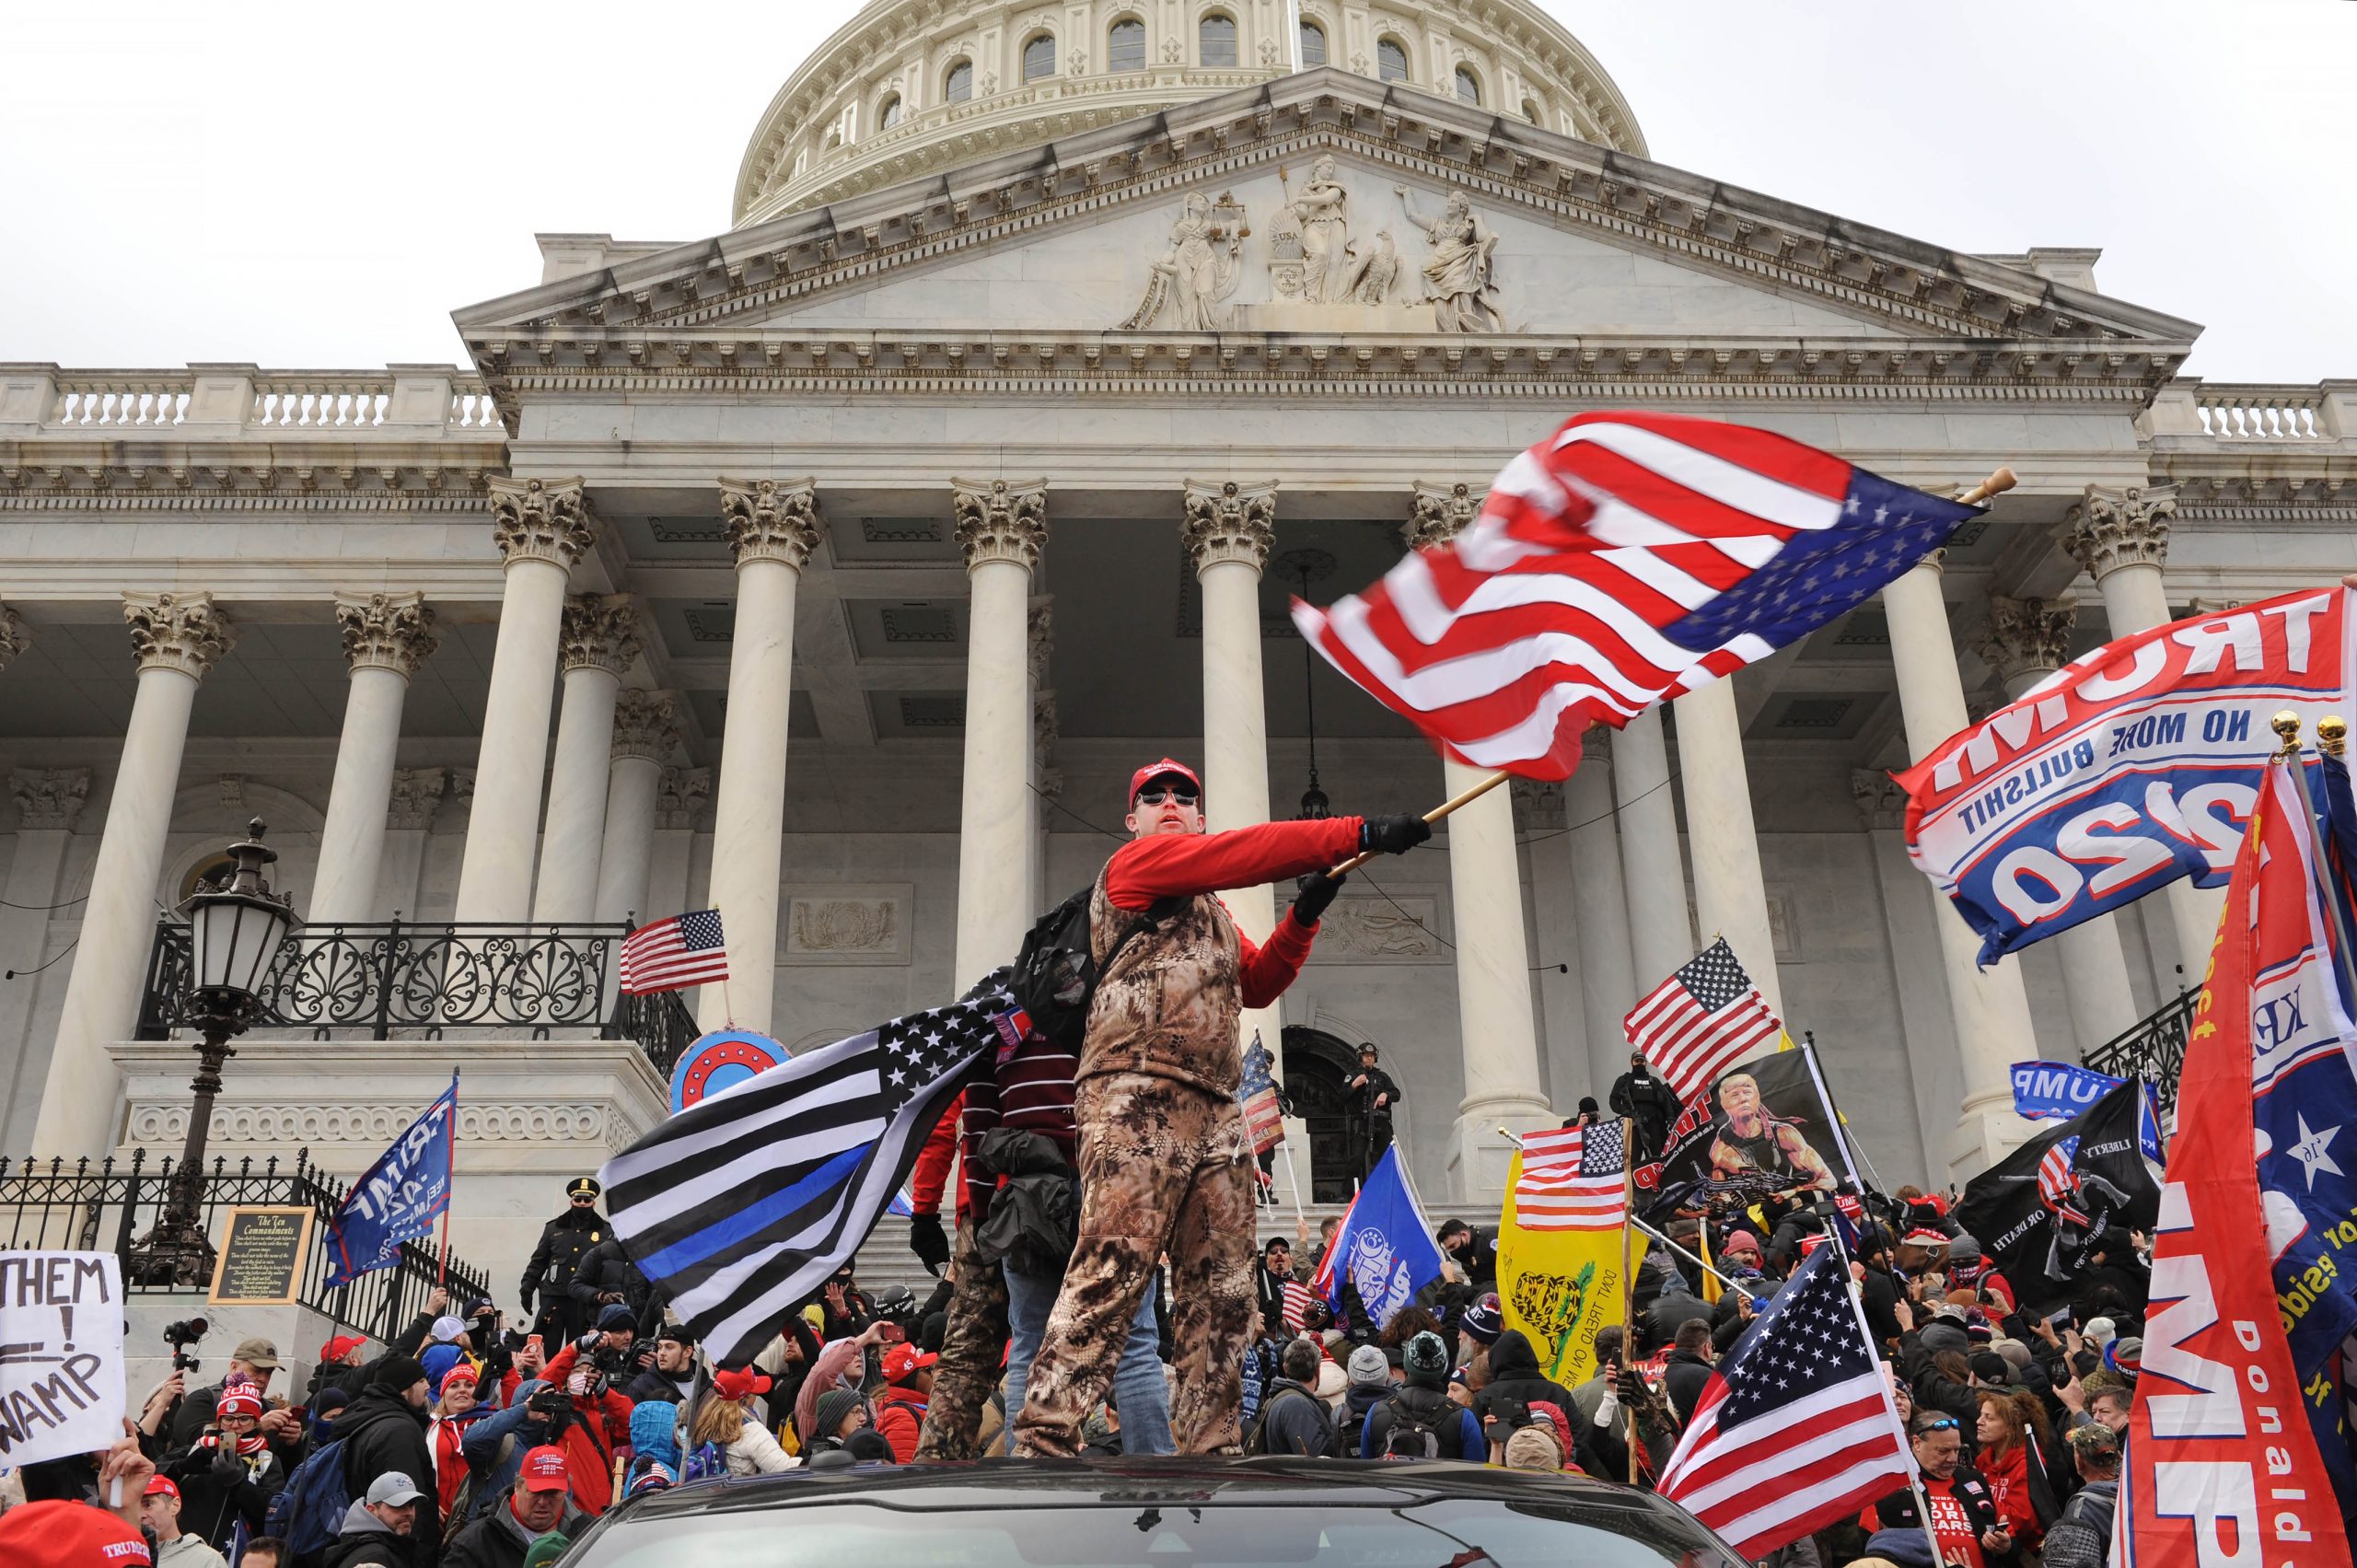 Overall shot of demonstrators on U.S. Capitol steps, man standing on top of a car waving flag, policeman in background at top, second policeman at left. Note QAnon (large Q) symbol and Blue Lives Matter flag (blue, white and black).